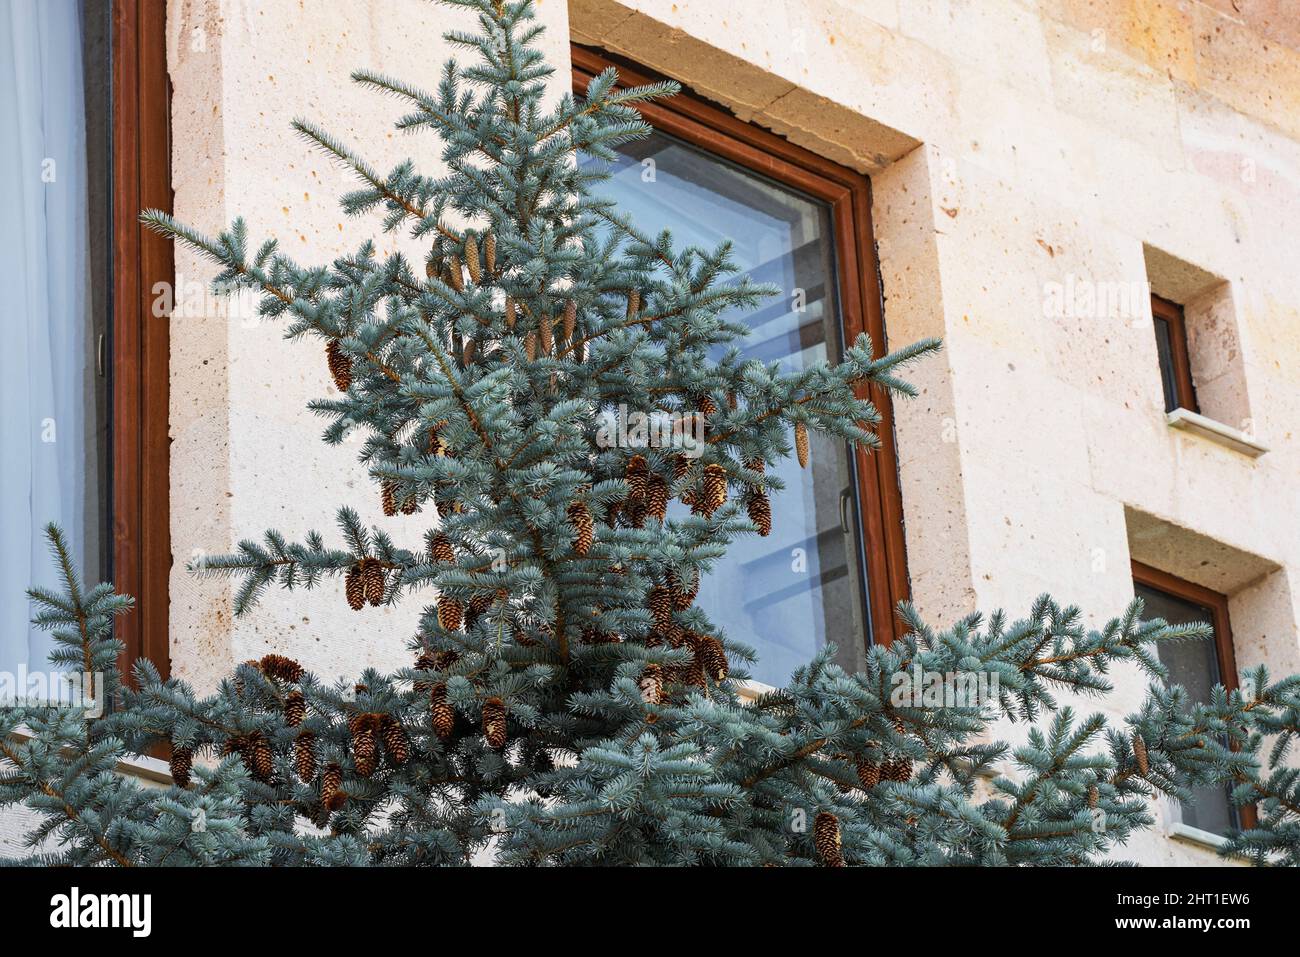 blue spruce with cones stands in front of the window of a whitewashed stone house. Stock Photo